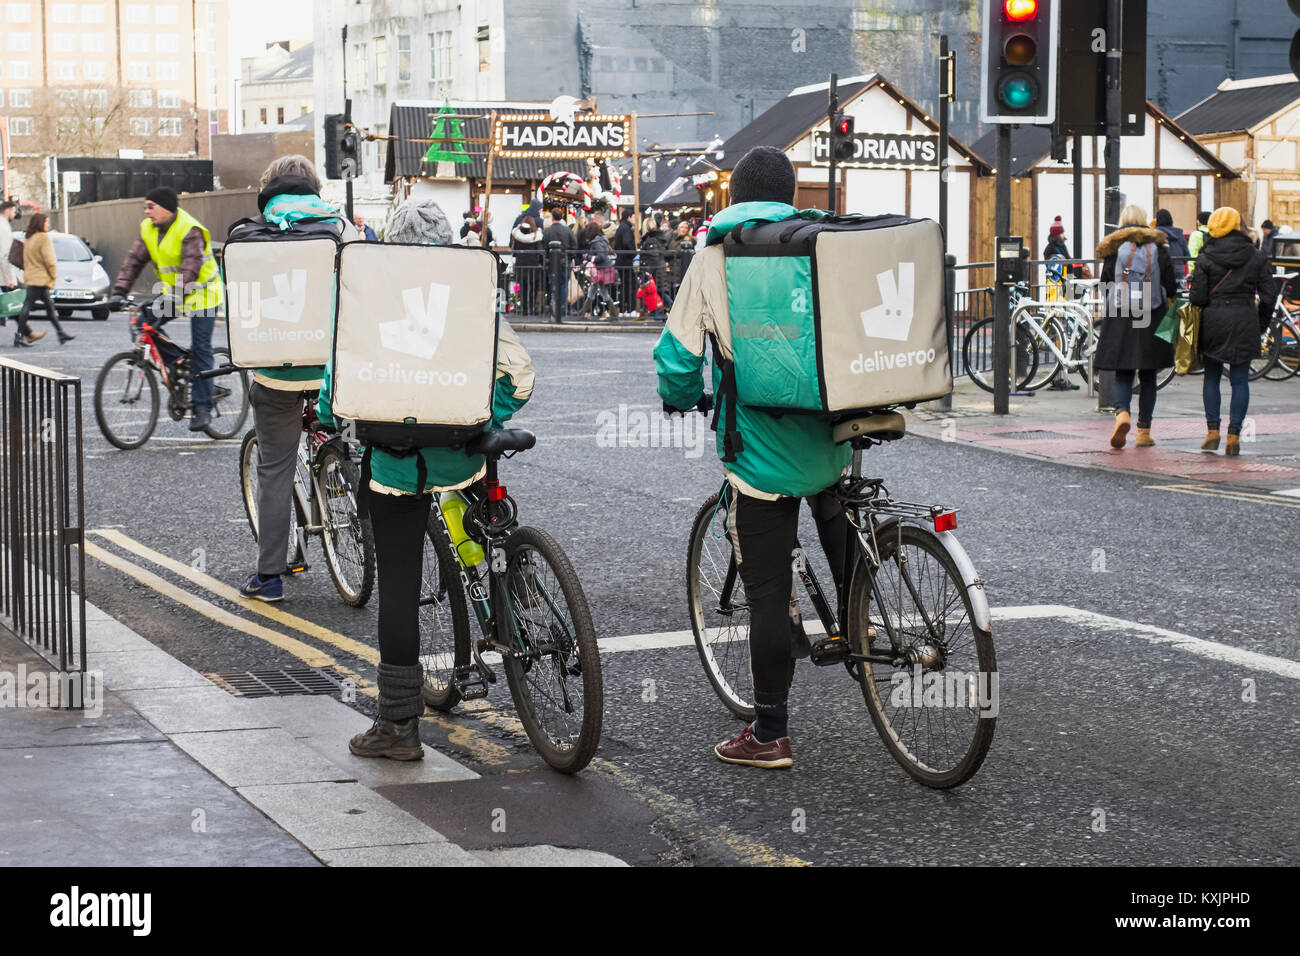 Three Deliveroo cyclists wait for traffic lights to change to green on a Newcastle upon Tyne street whilst delivering or collecting food orders. Stock Photo